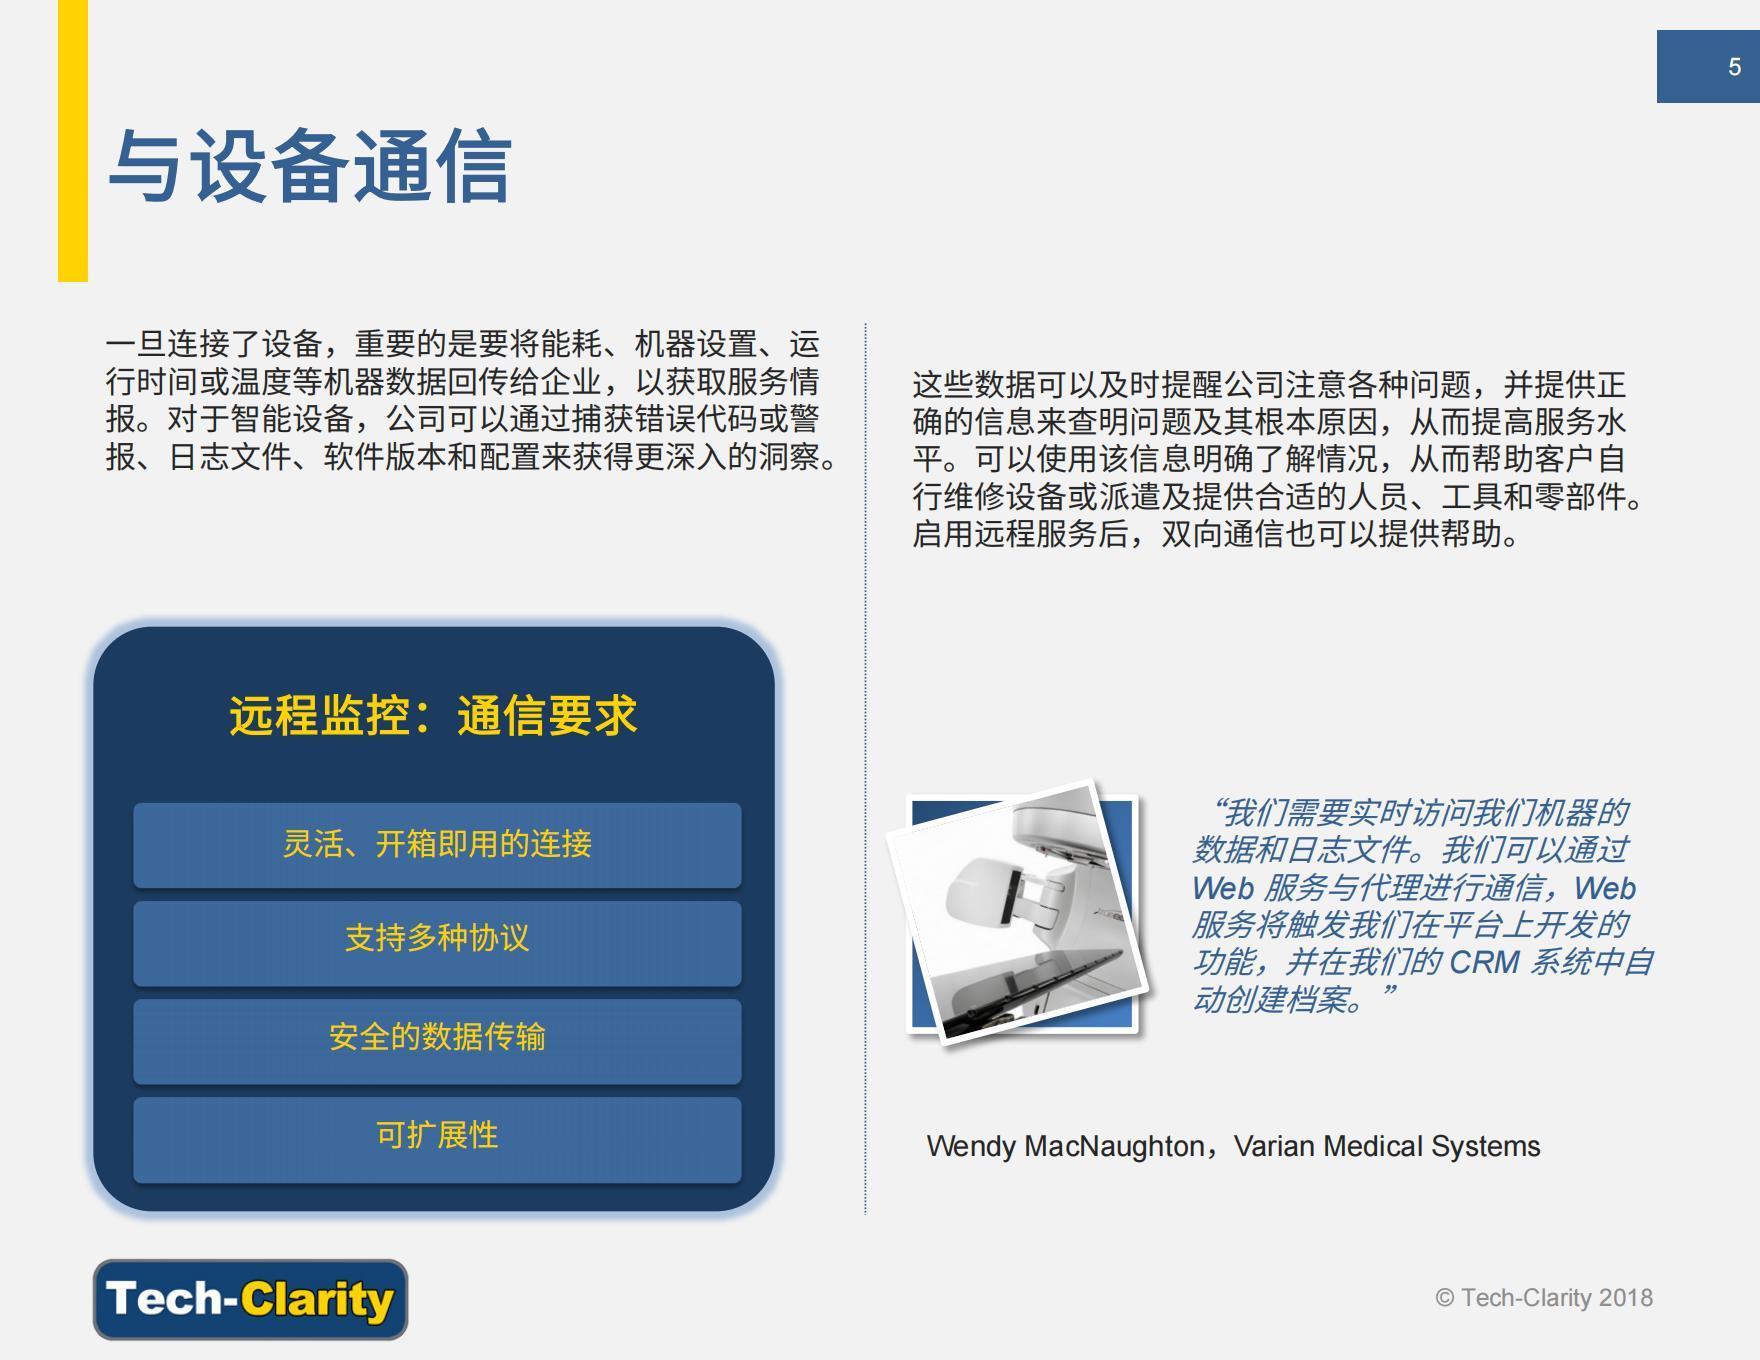 Buyer's Guide - Improving Service with Remote Monitoring (Simplified Chinese)_04